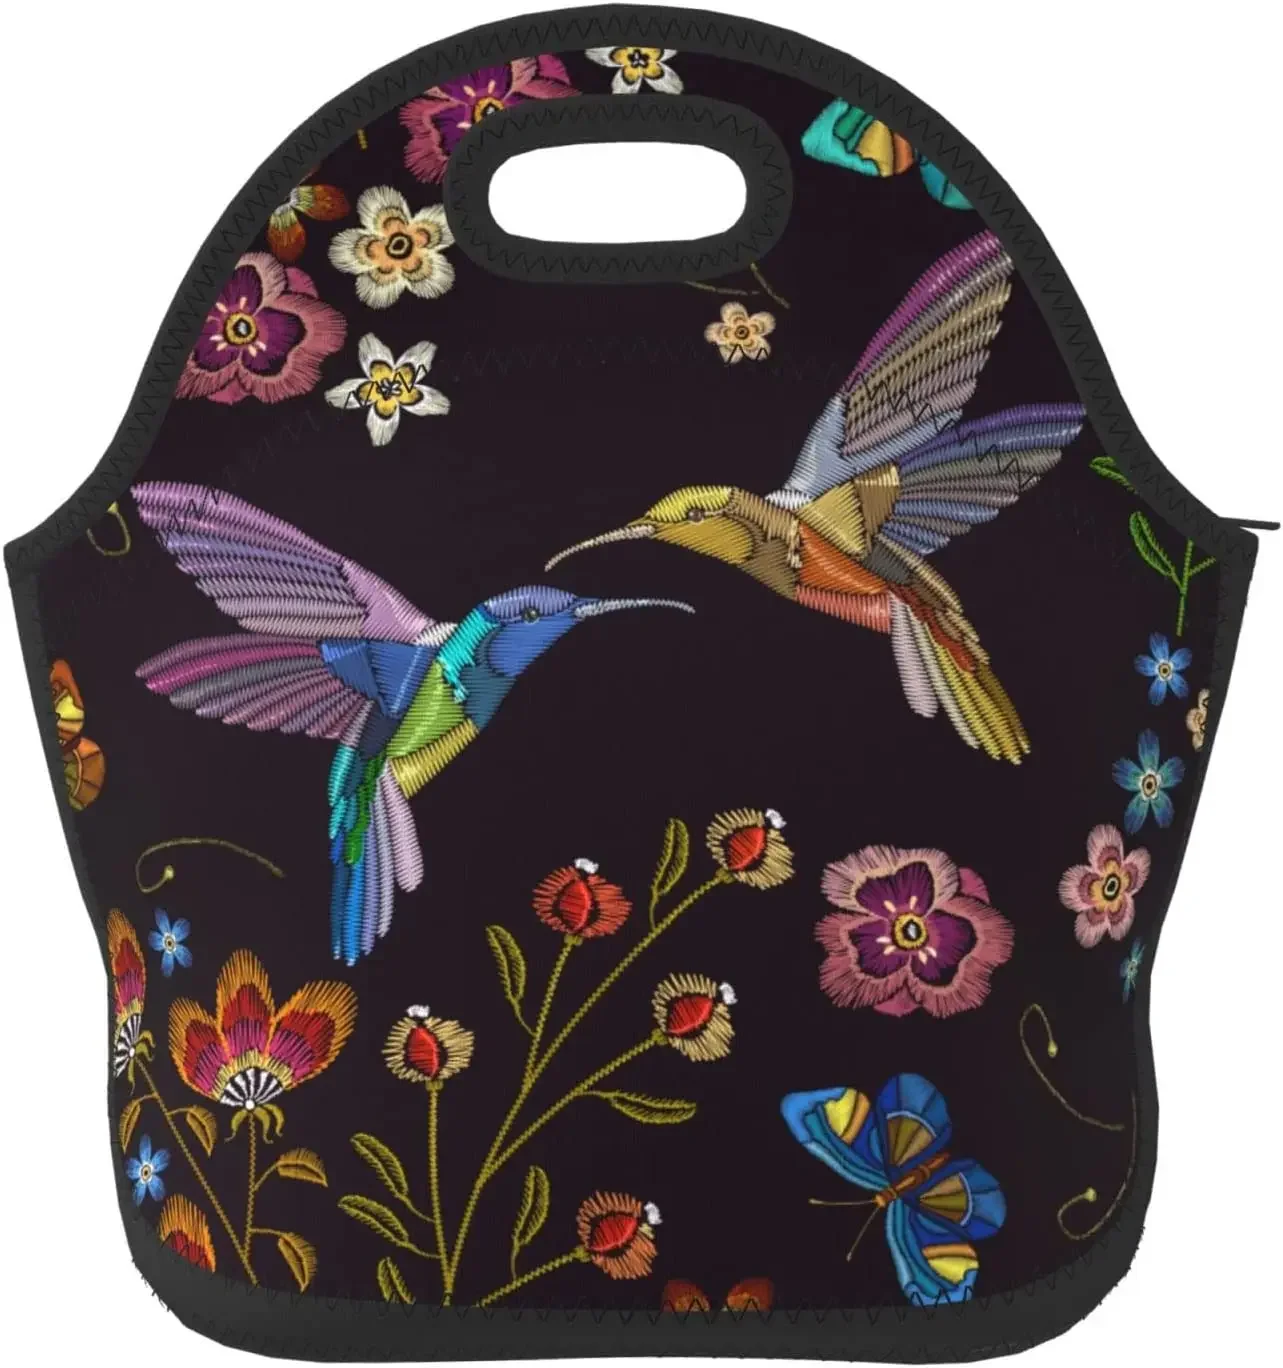 

Vintage Hummingbird Butterfly with Flowers Design High Capacity Lunch Tote Insulated Lunchbox for Women Adults Teens Students